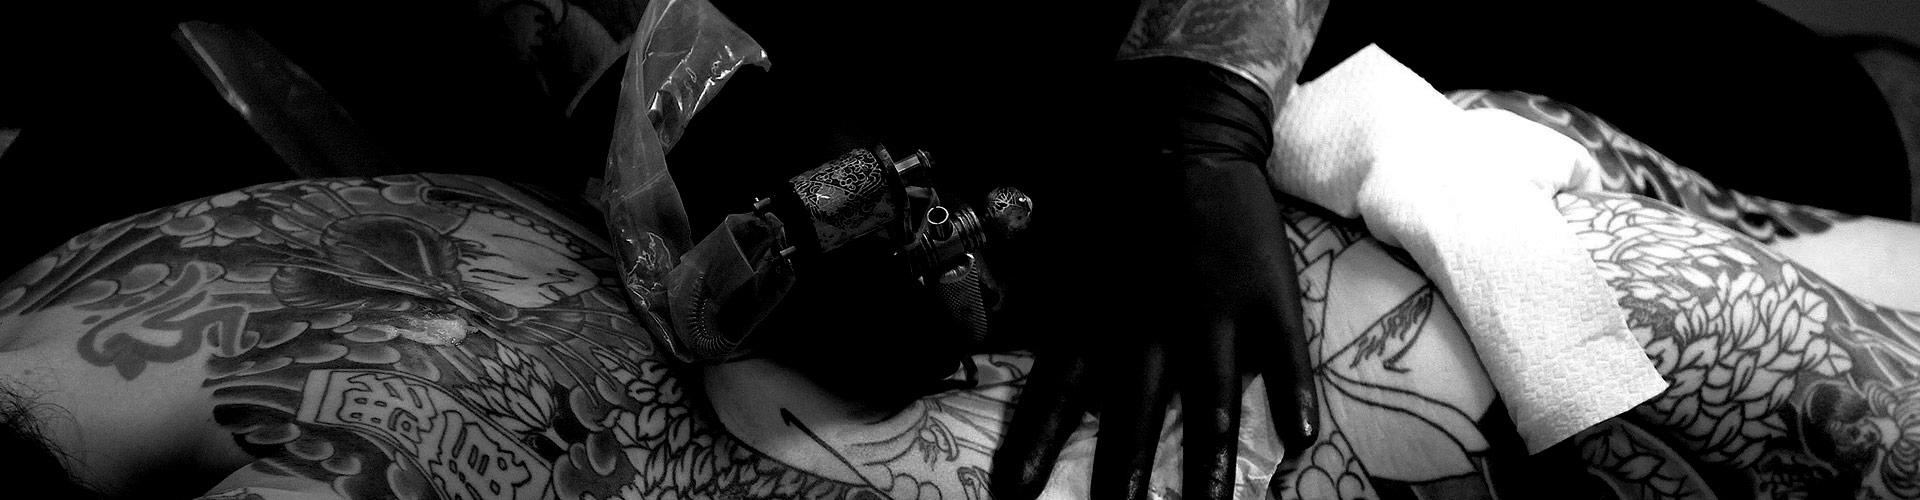 Artists Florence Tattoo Convention